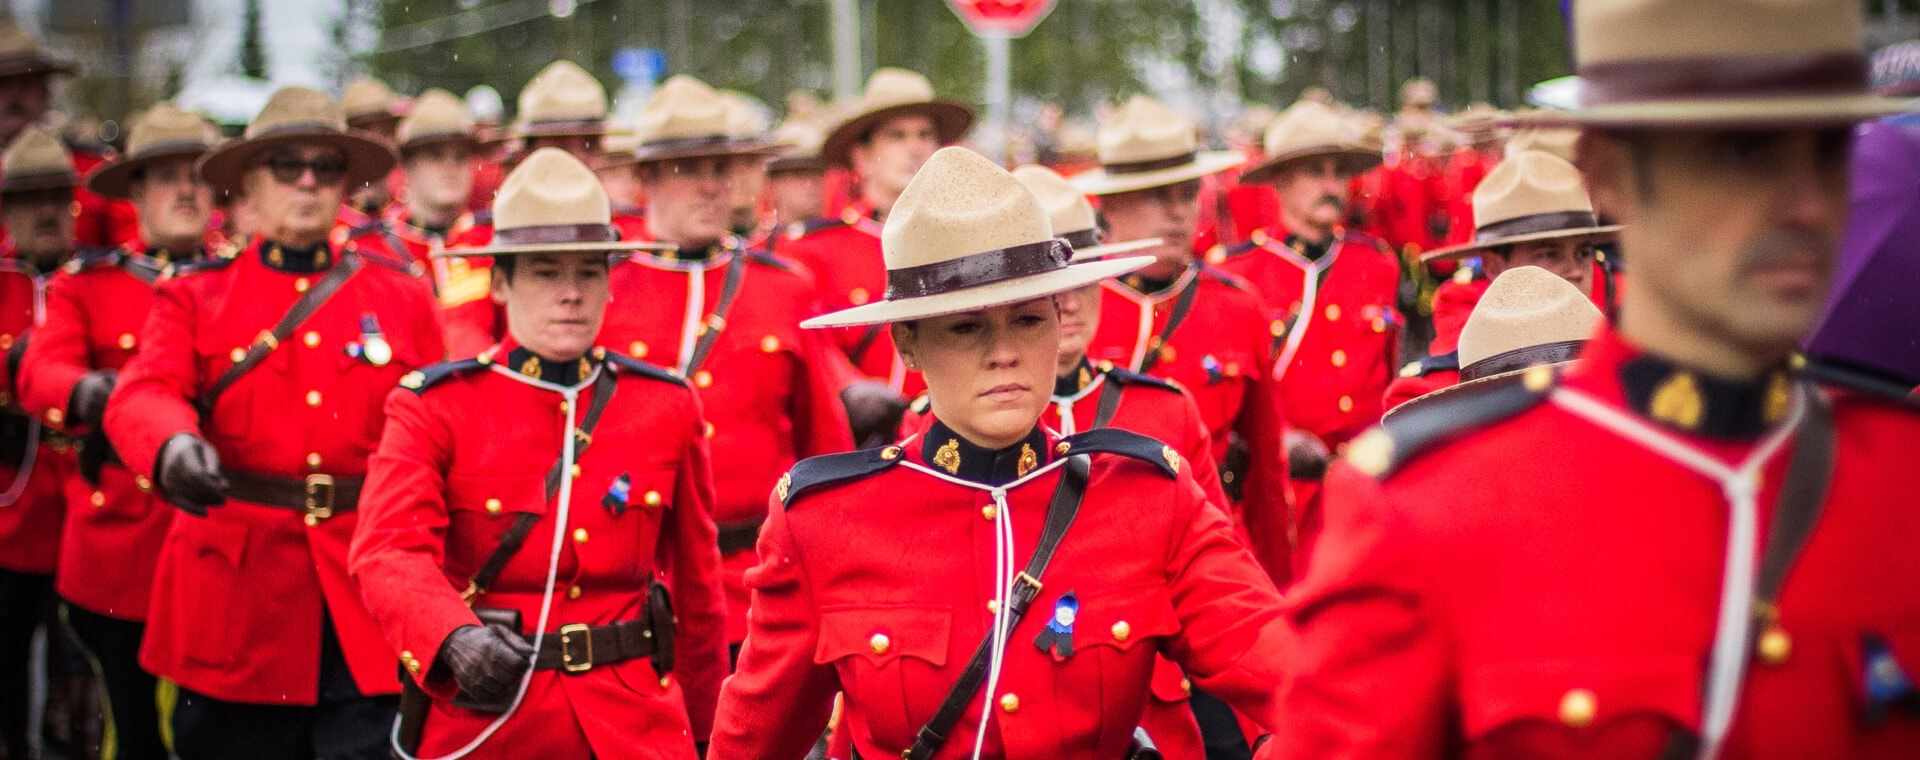 A group of canadian police officers in red uniforms.